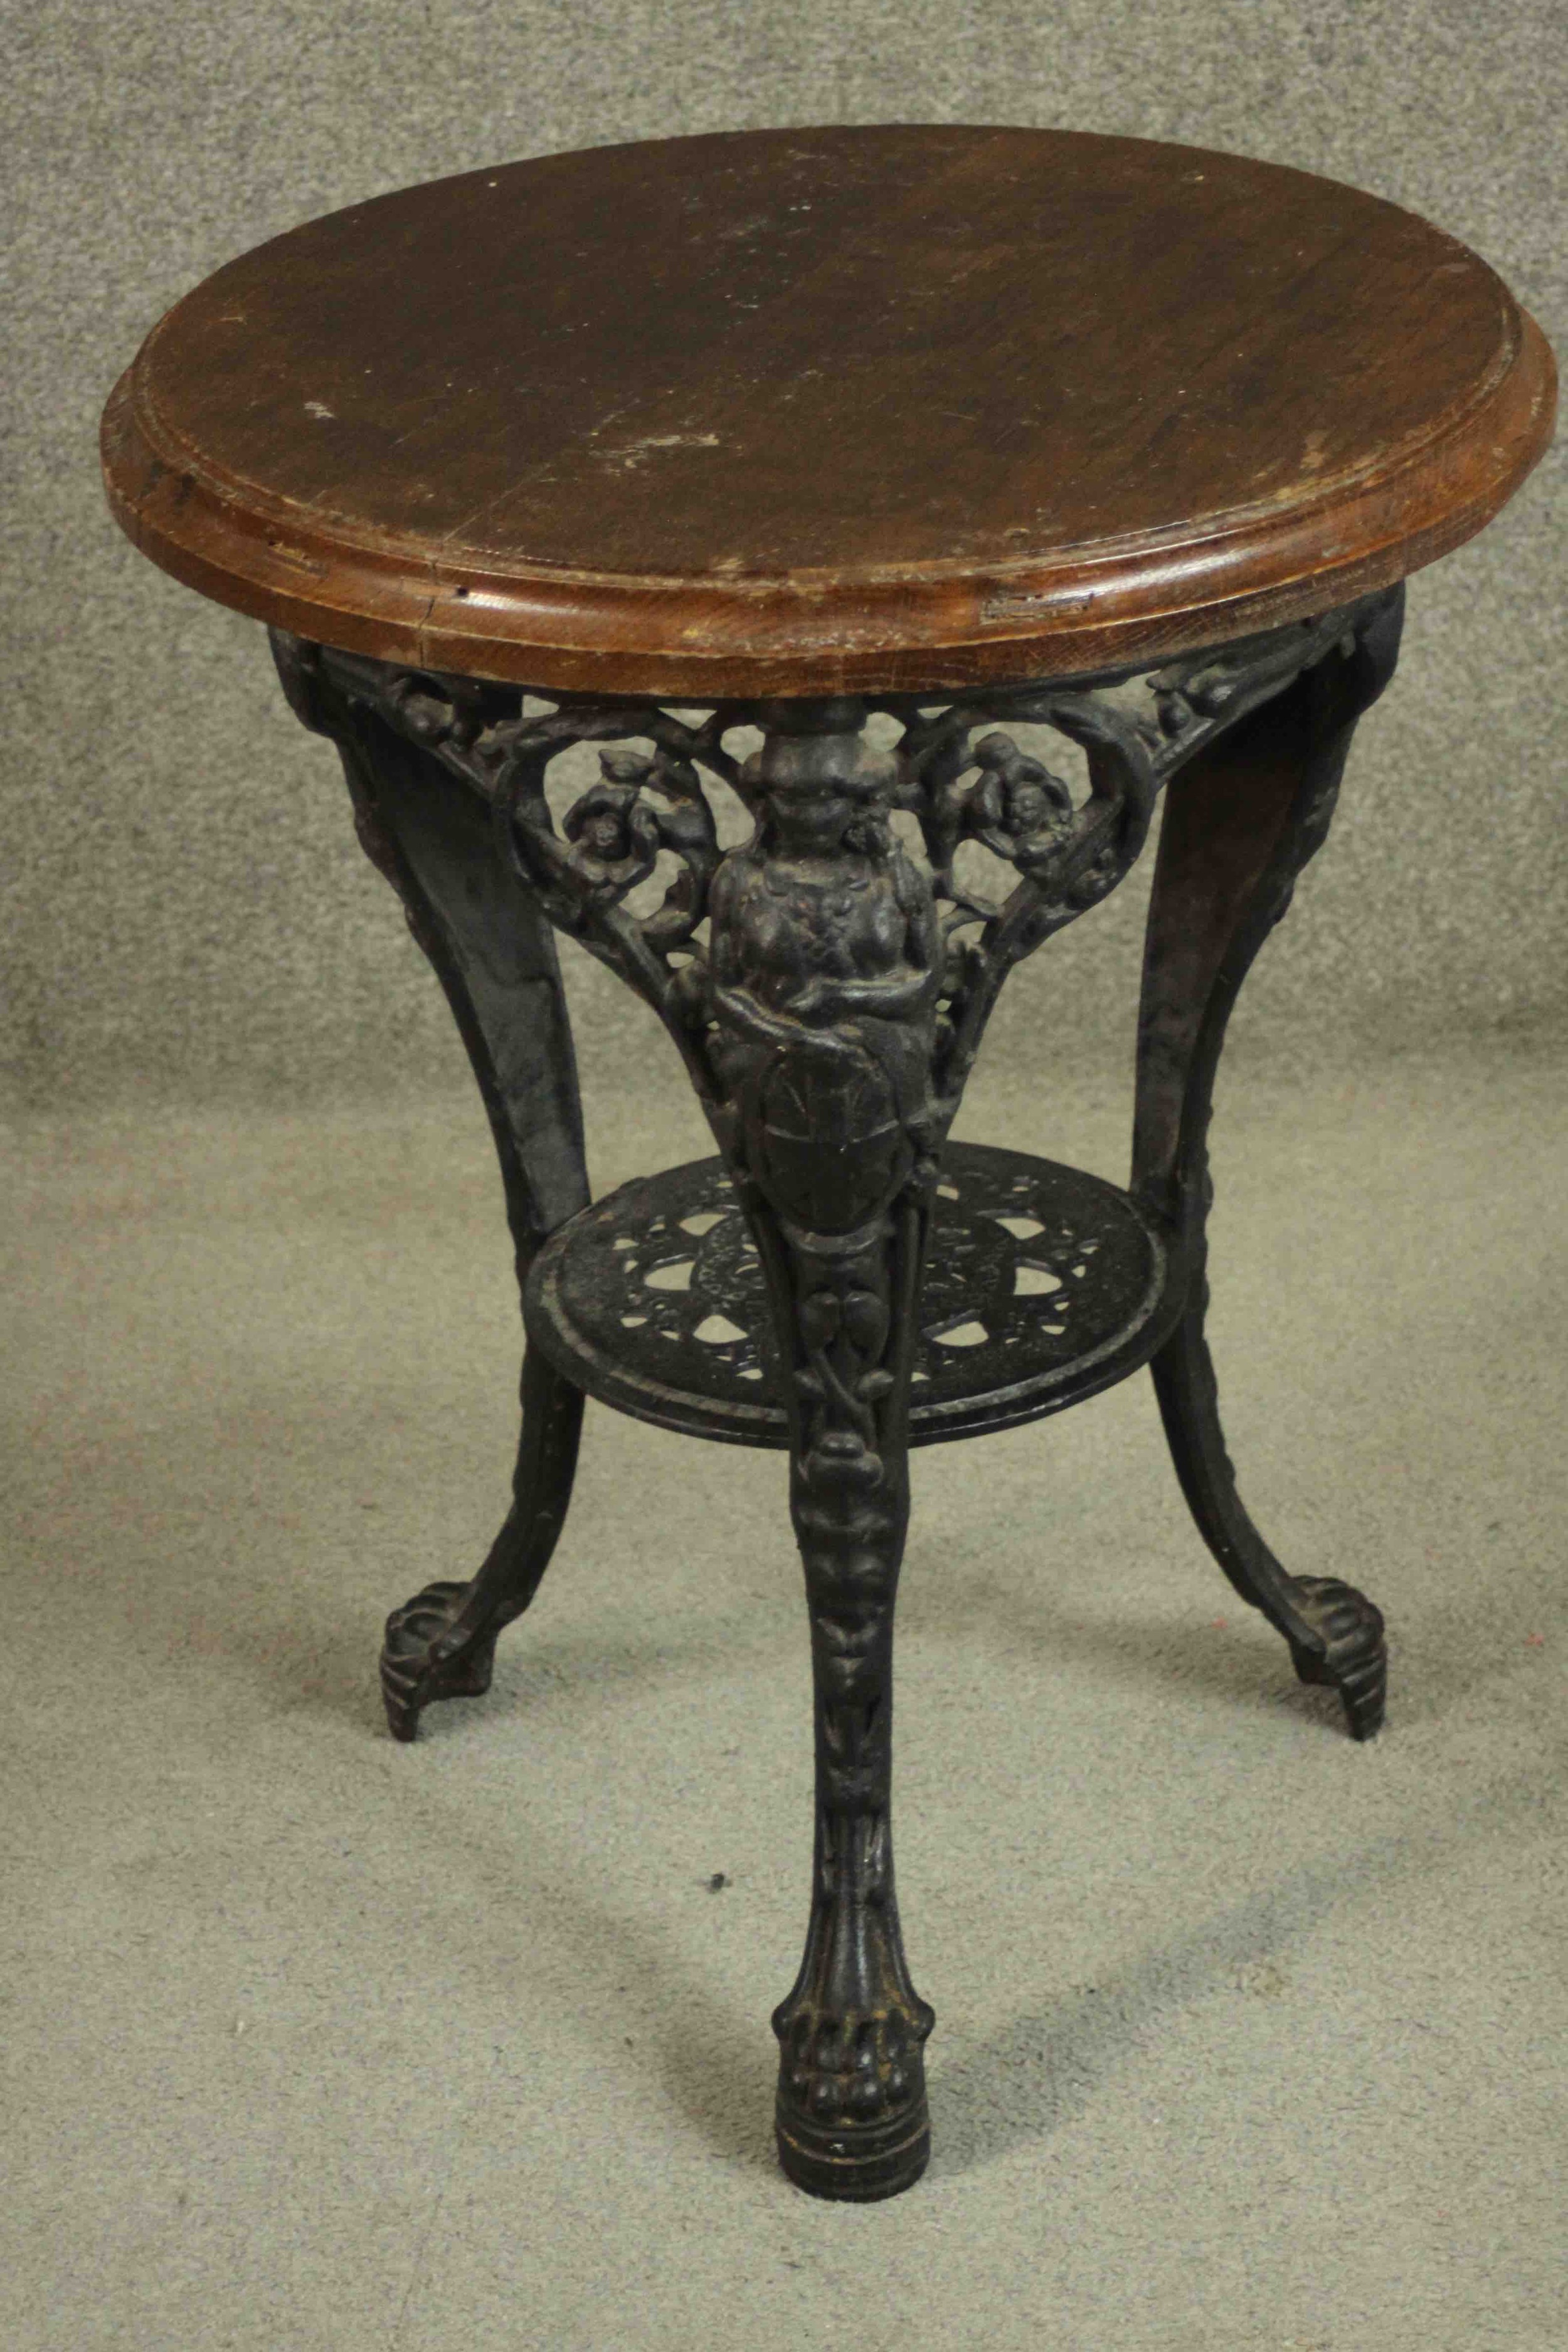 A black painted Victorian cast iron pub table with a circular oak top on three curved legs joined by